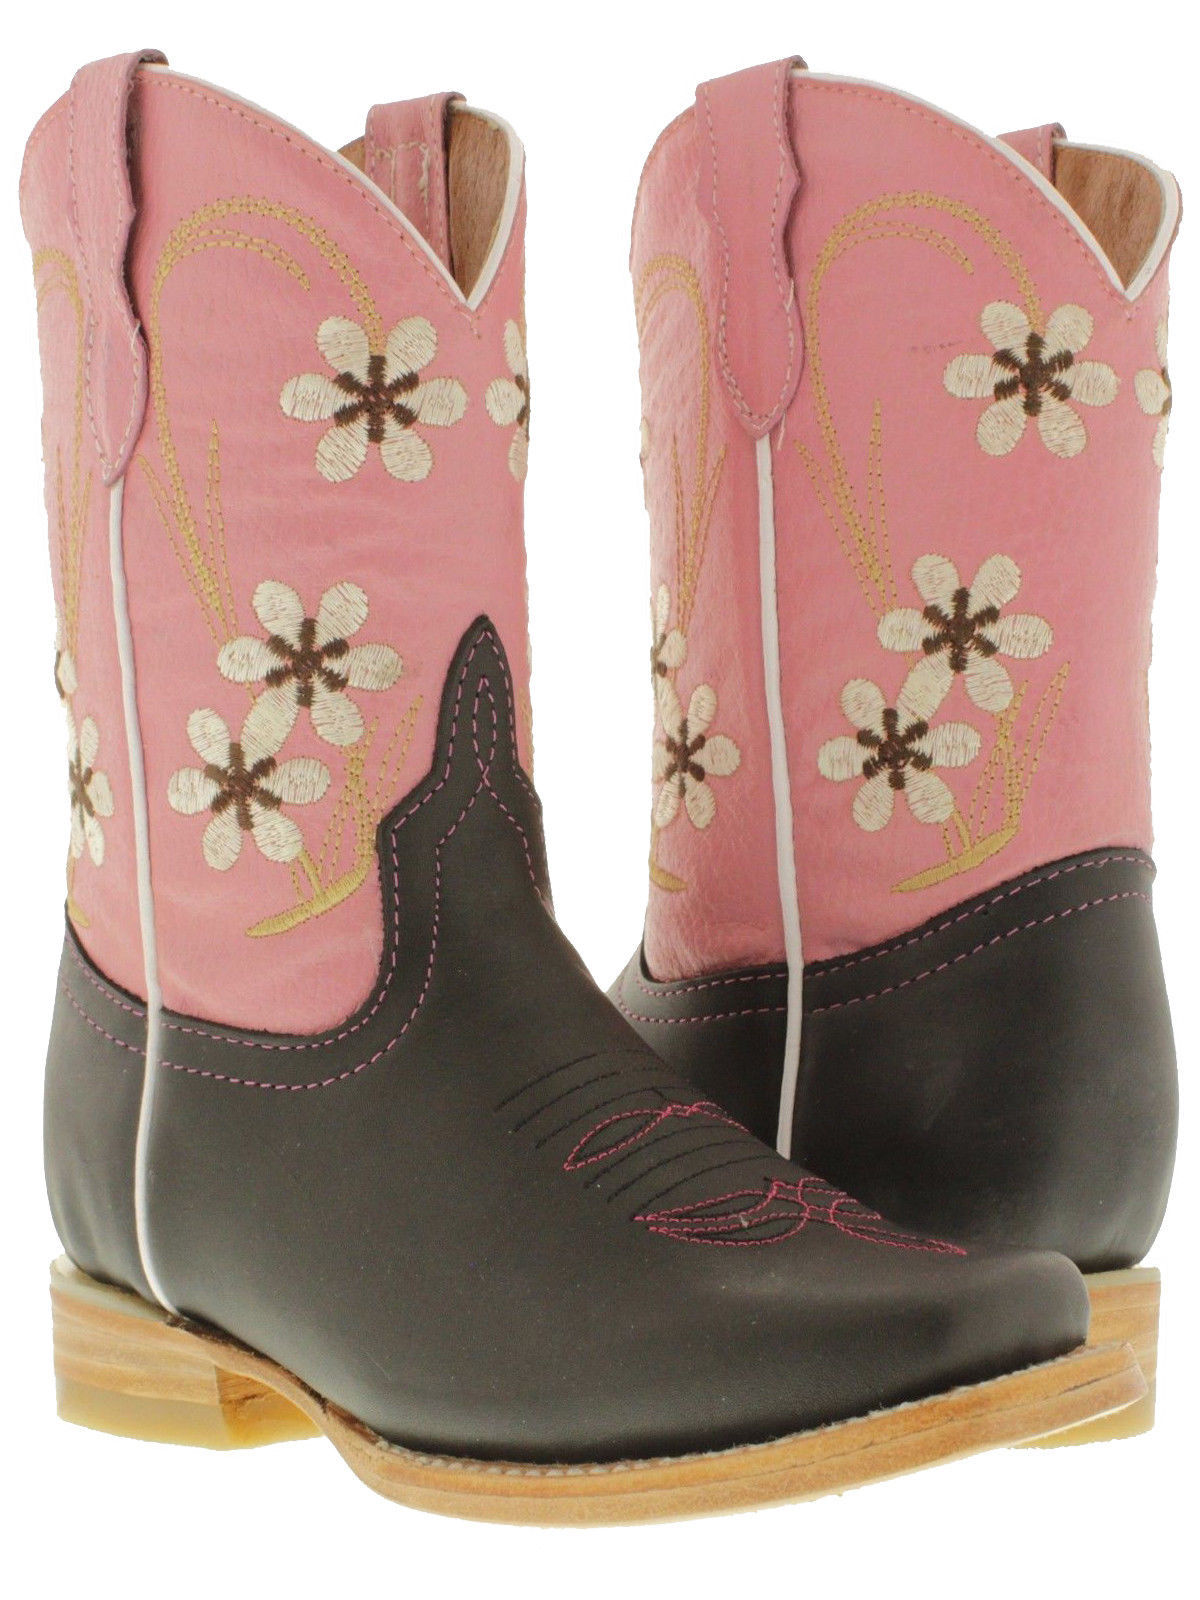 Primary image for Girls Kids Black Pink Leather Flower Rodeo Square Pull On Western Cowgirl Boots